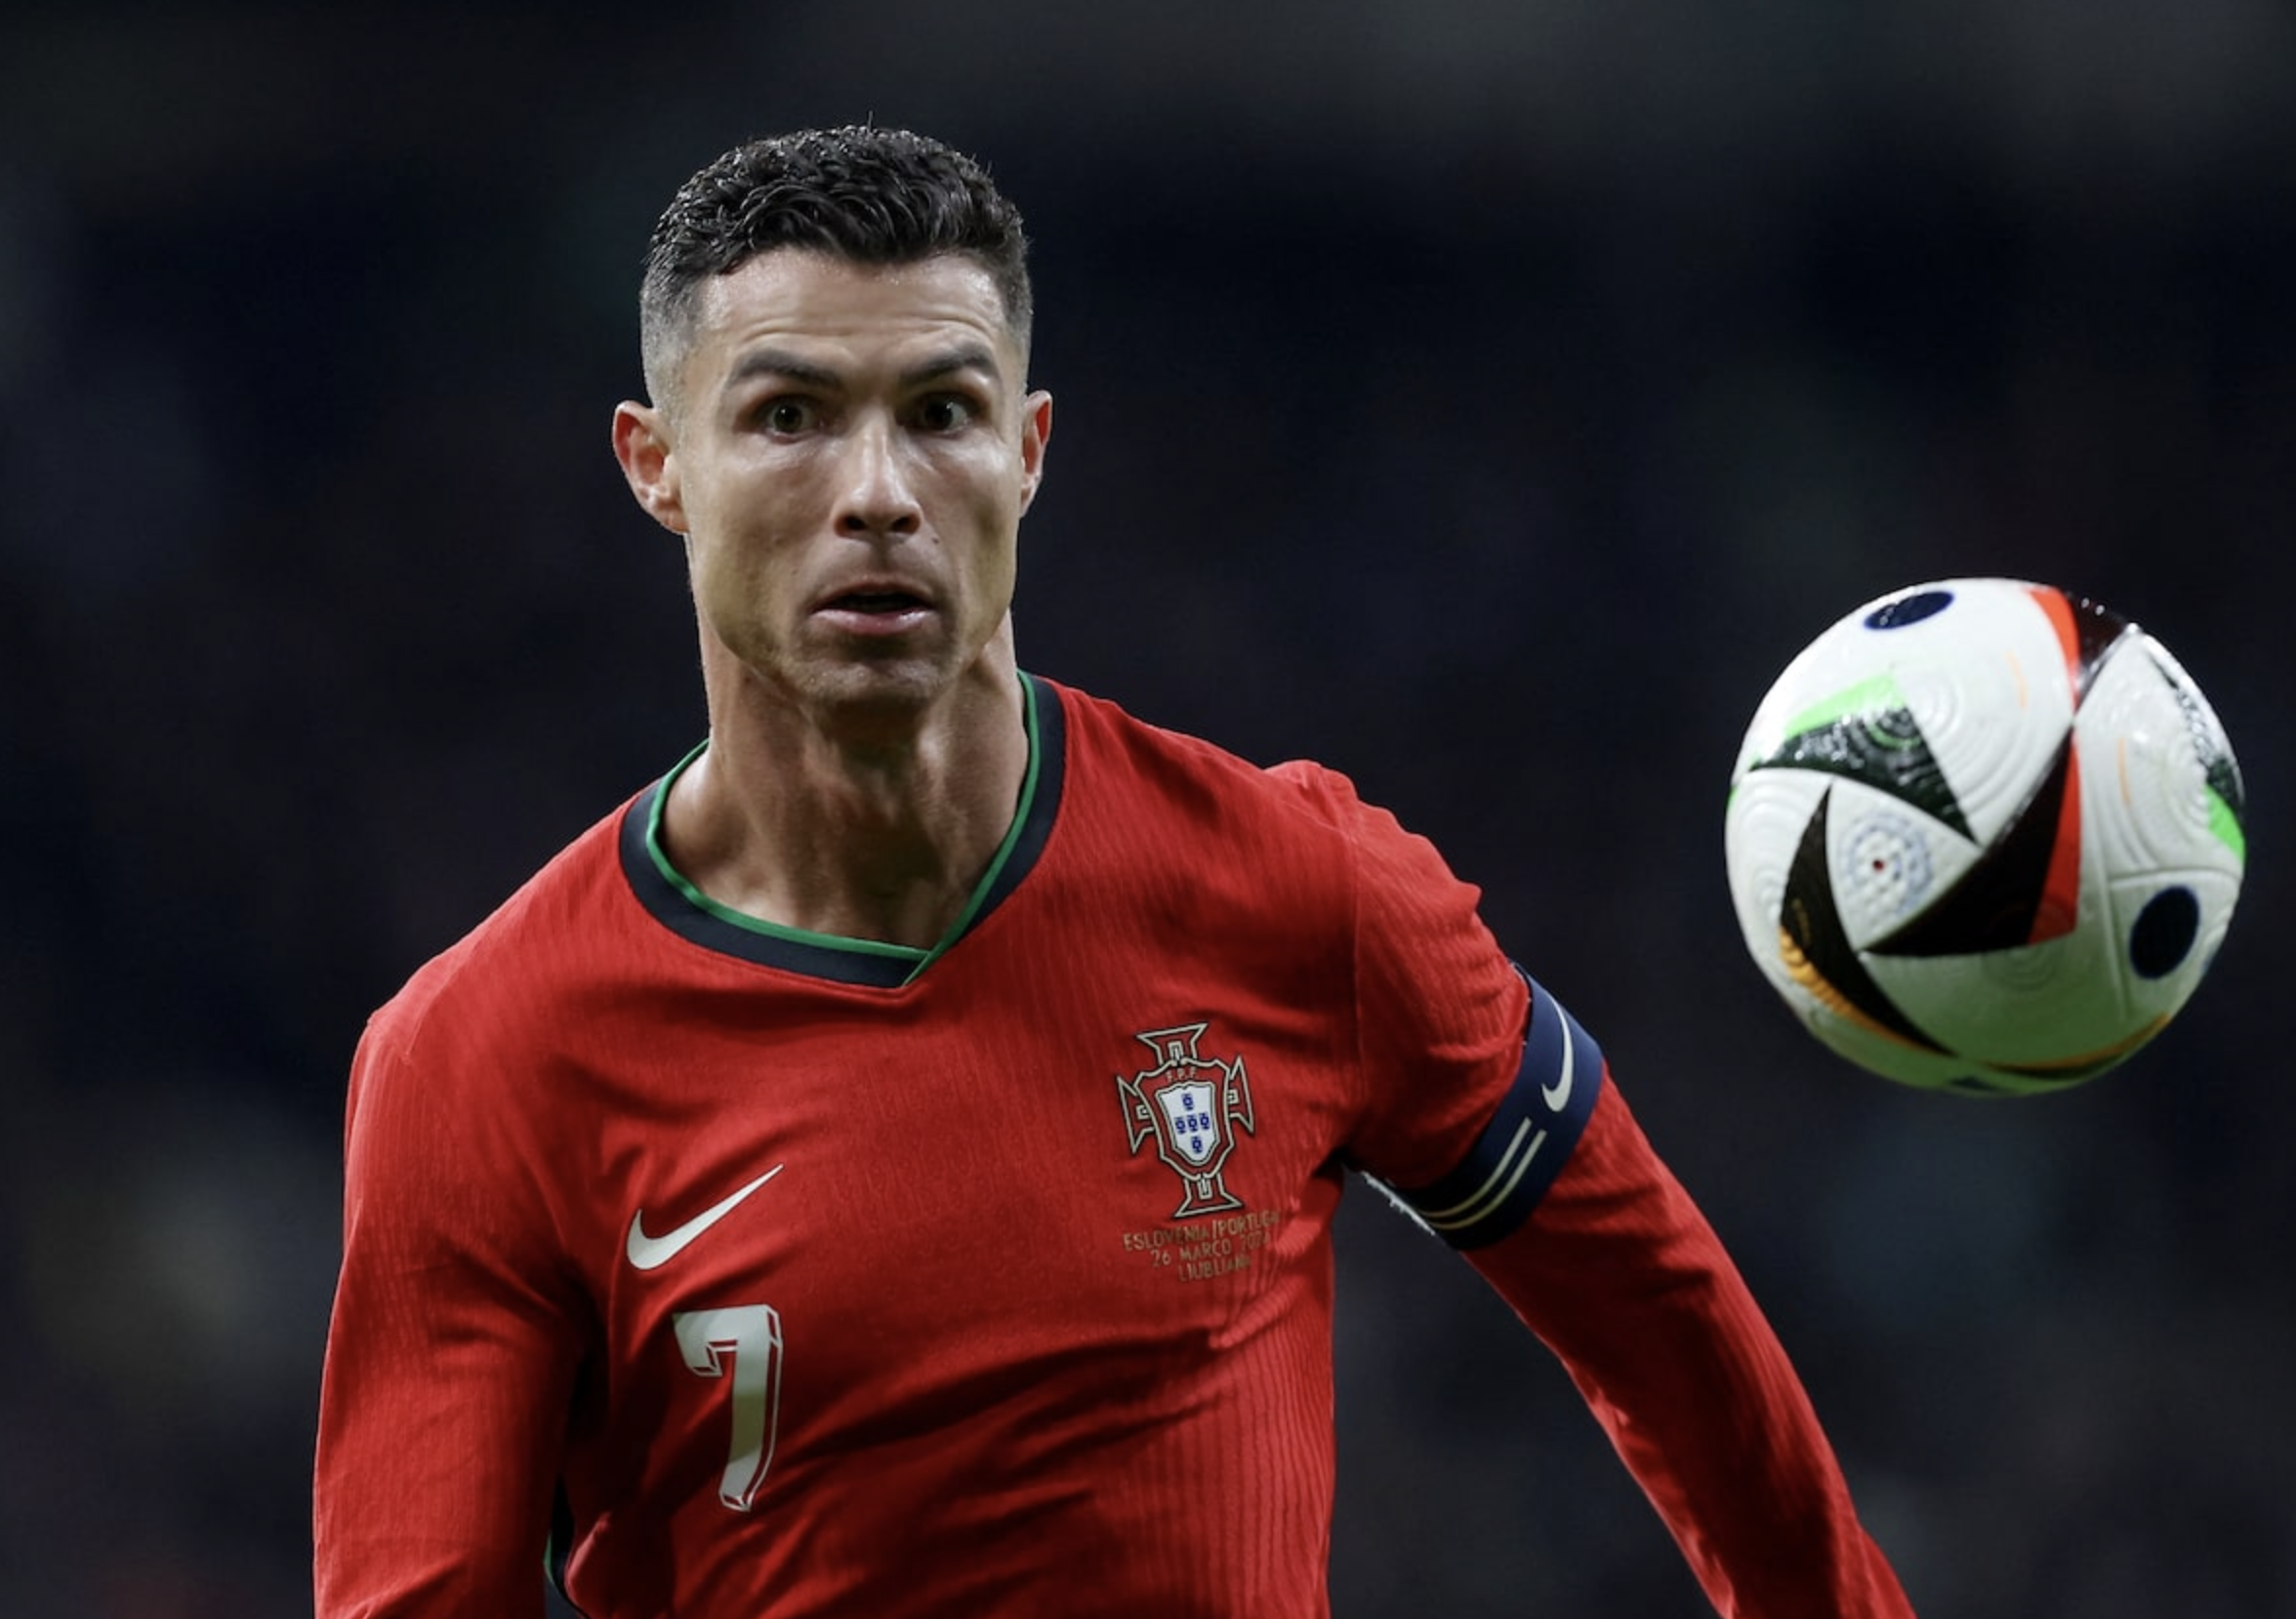 Relentless Ronaldo chasing more Euro glory with Portugal